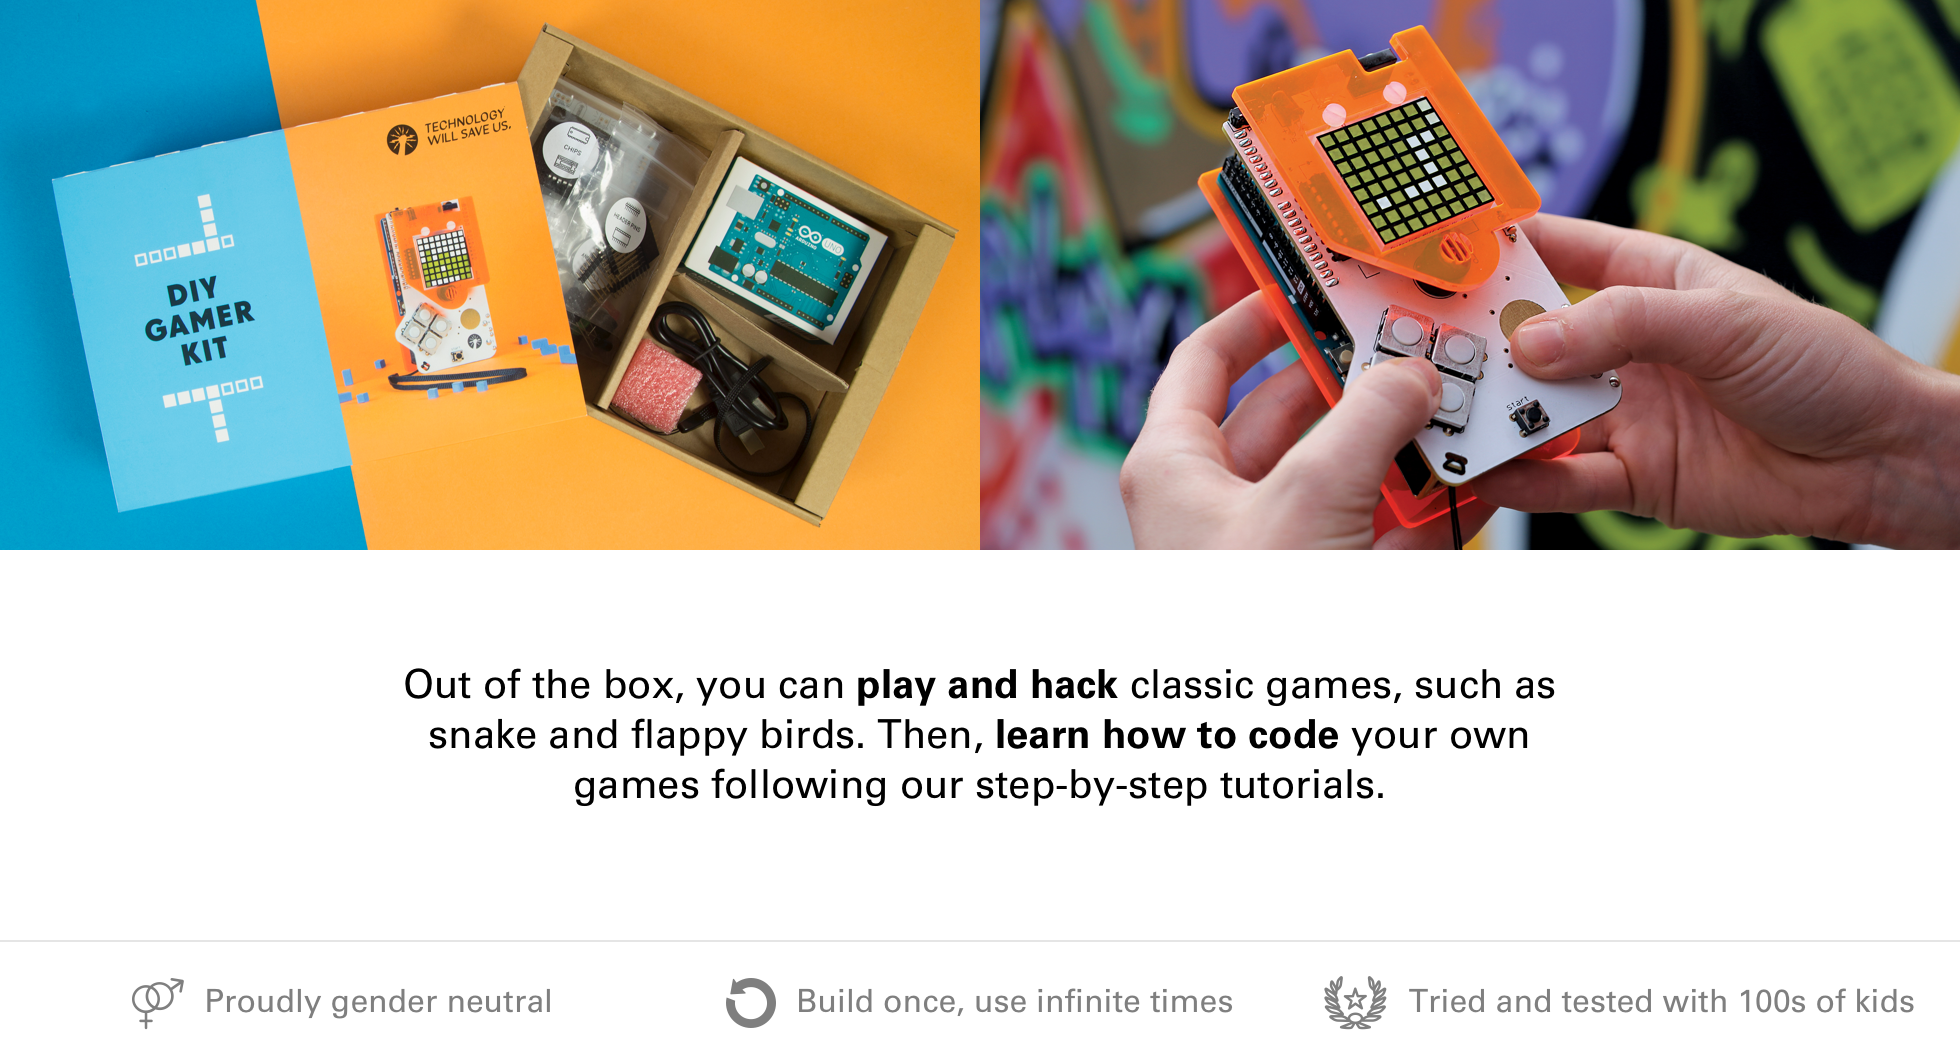 Build your own handheld Arduino games console and learn to code games with the DIY Gamer Kit